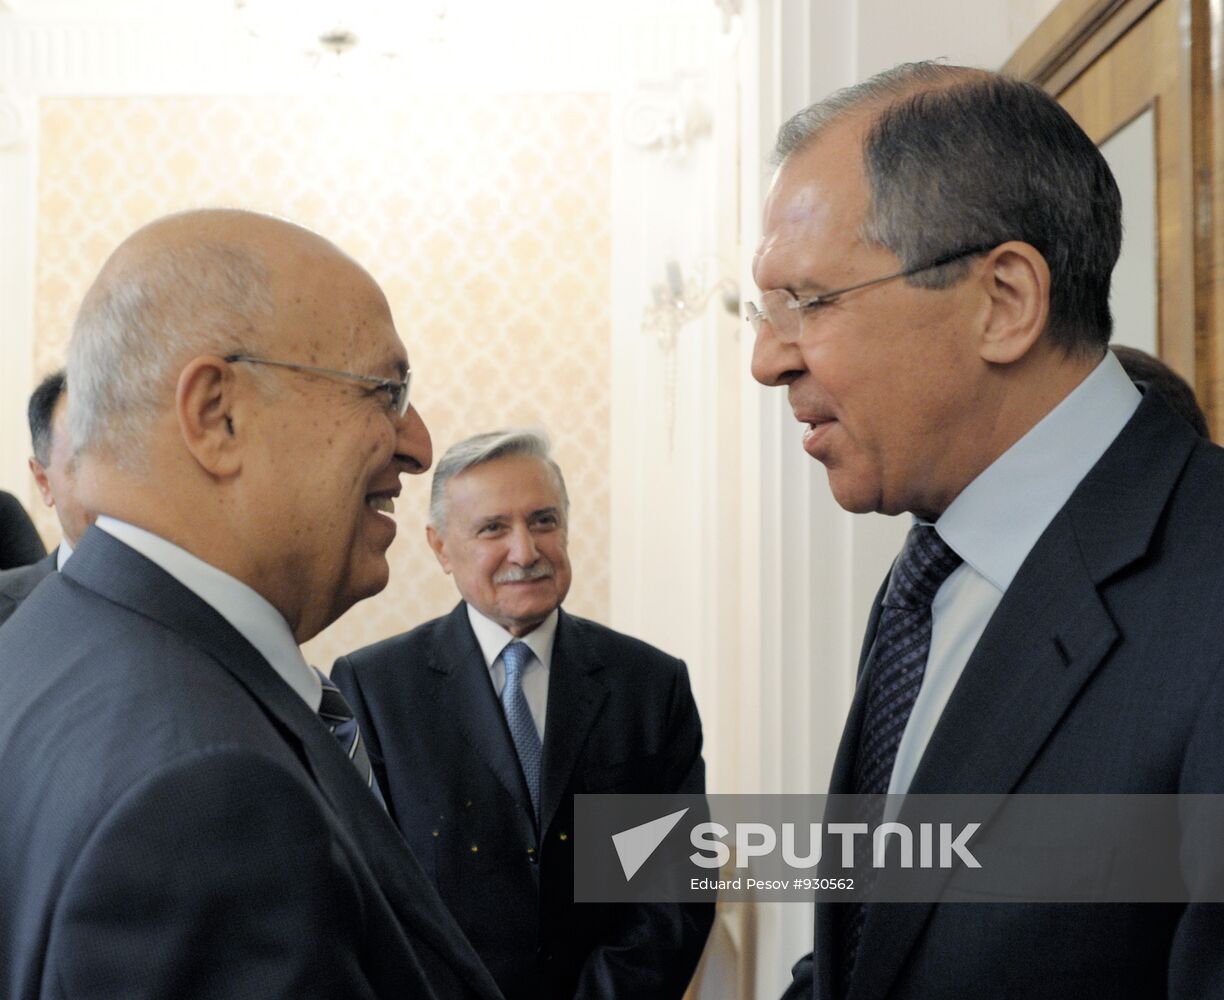 Sergei Lavrov meets with Nabil Shaath, Moscow